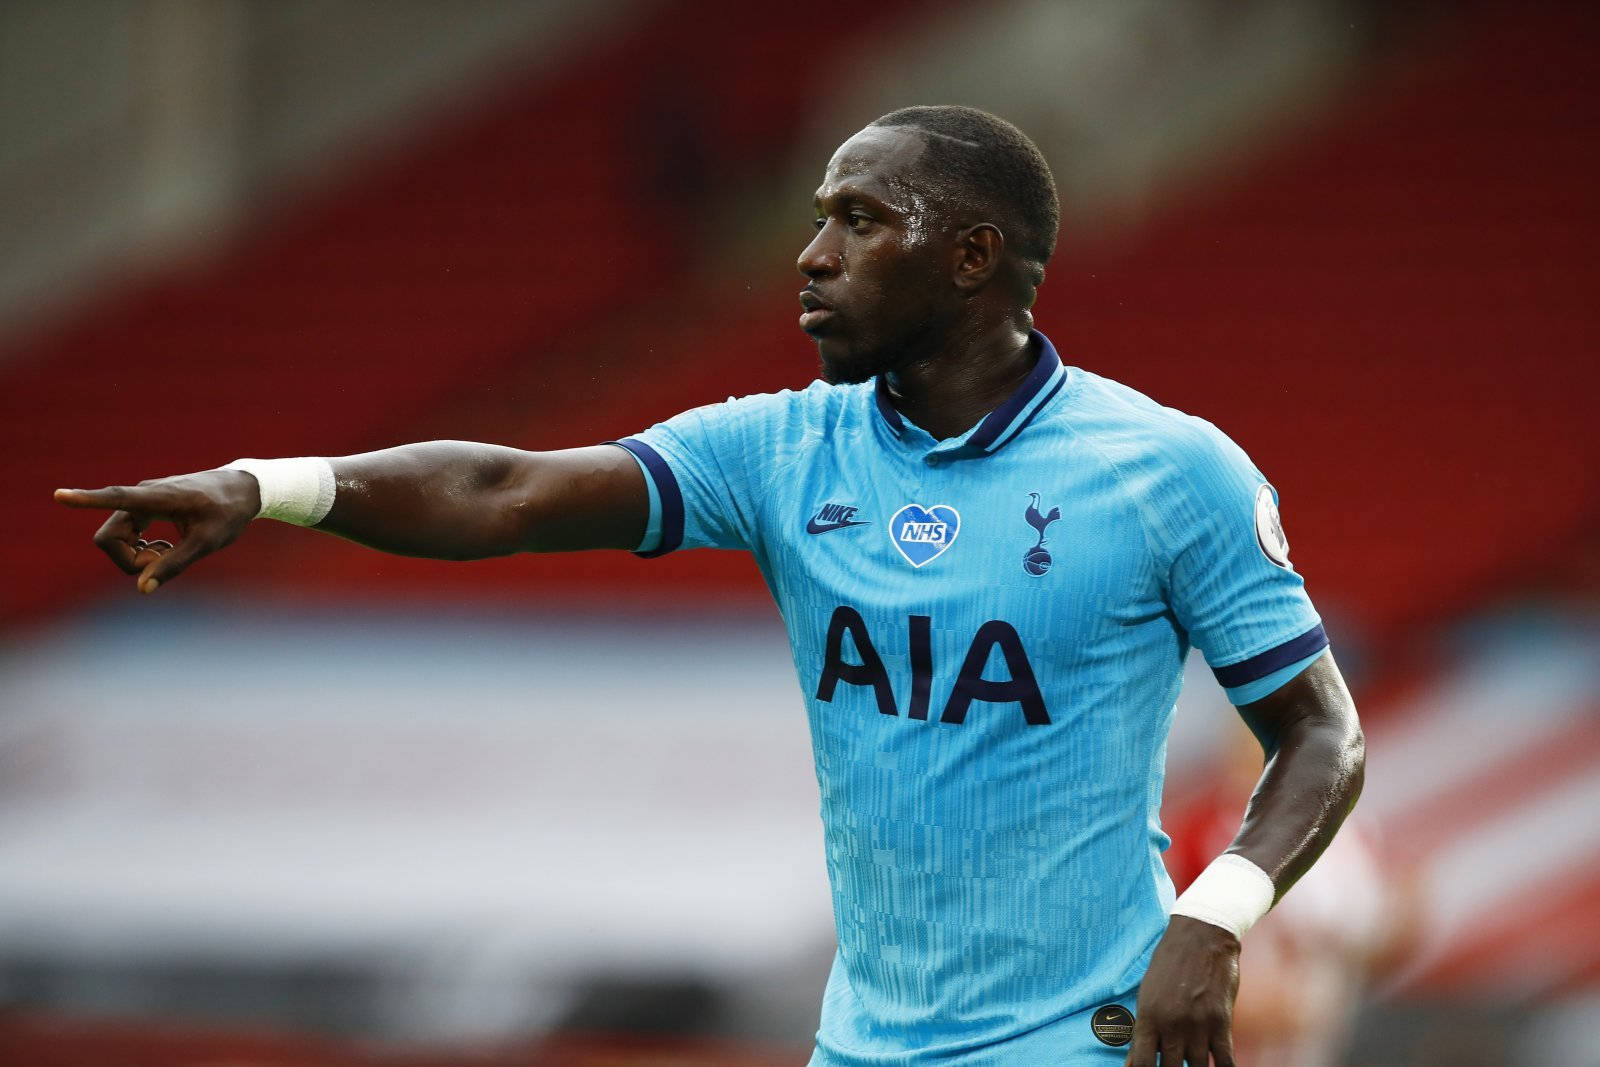 Moussa Sissoko In Cyan-Colored Jersey Wallpaper